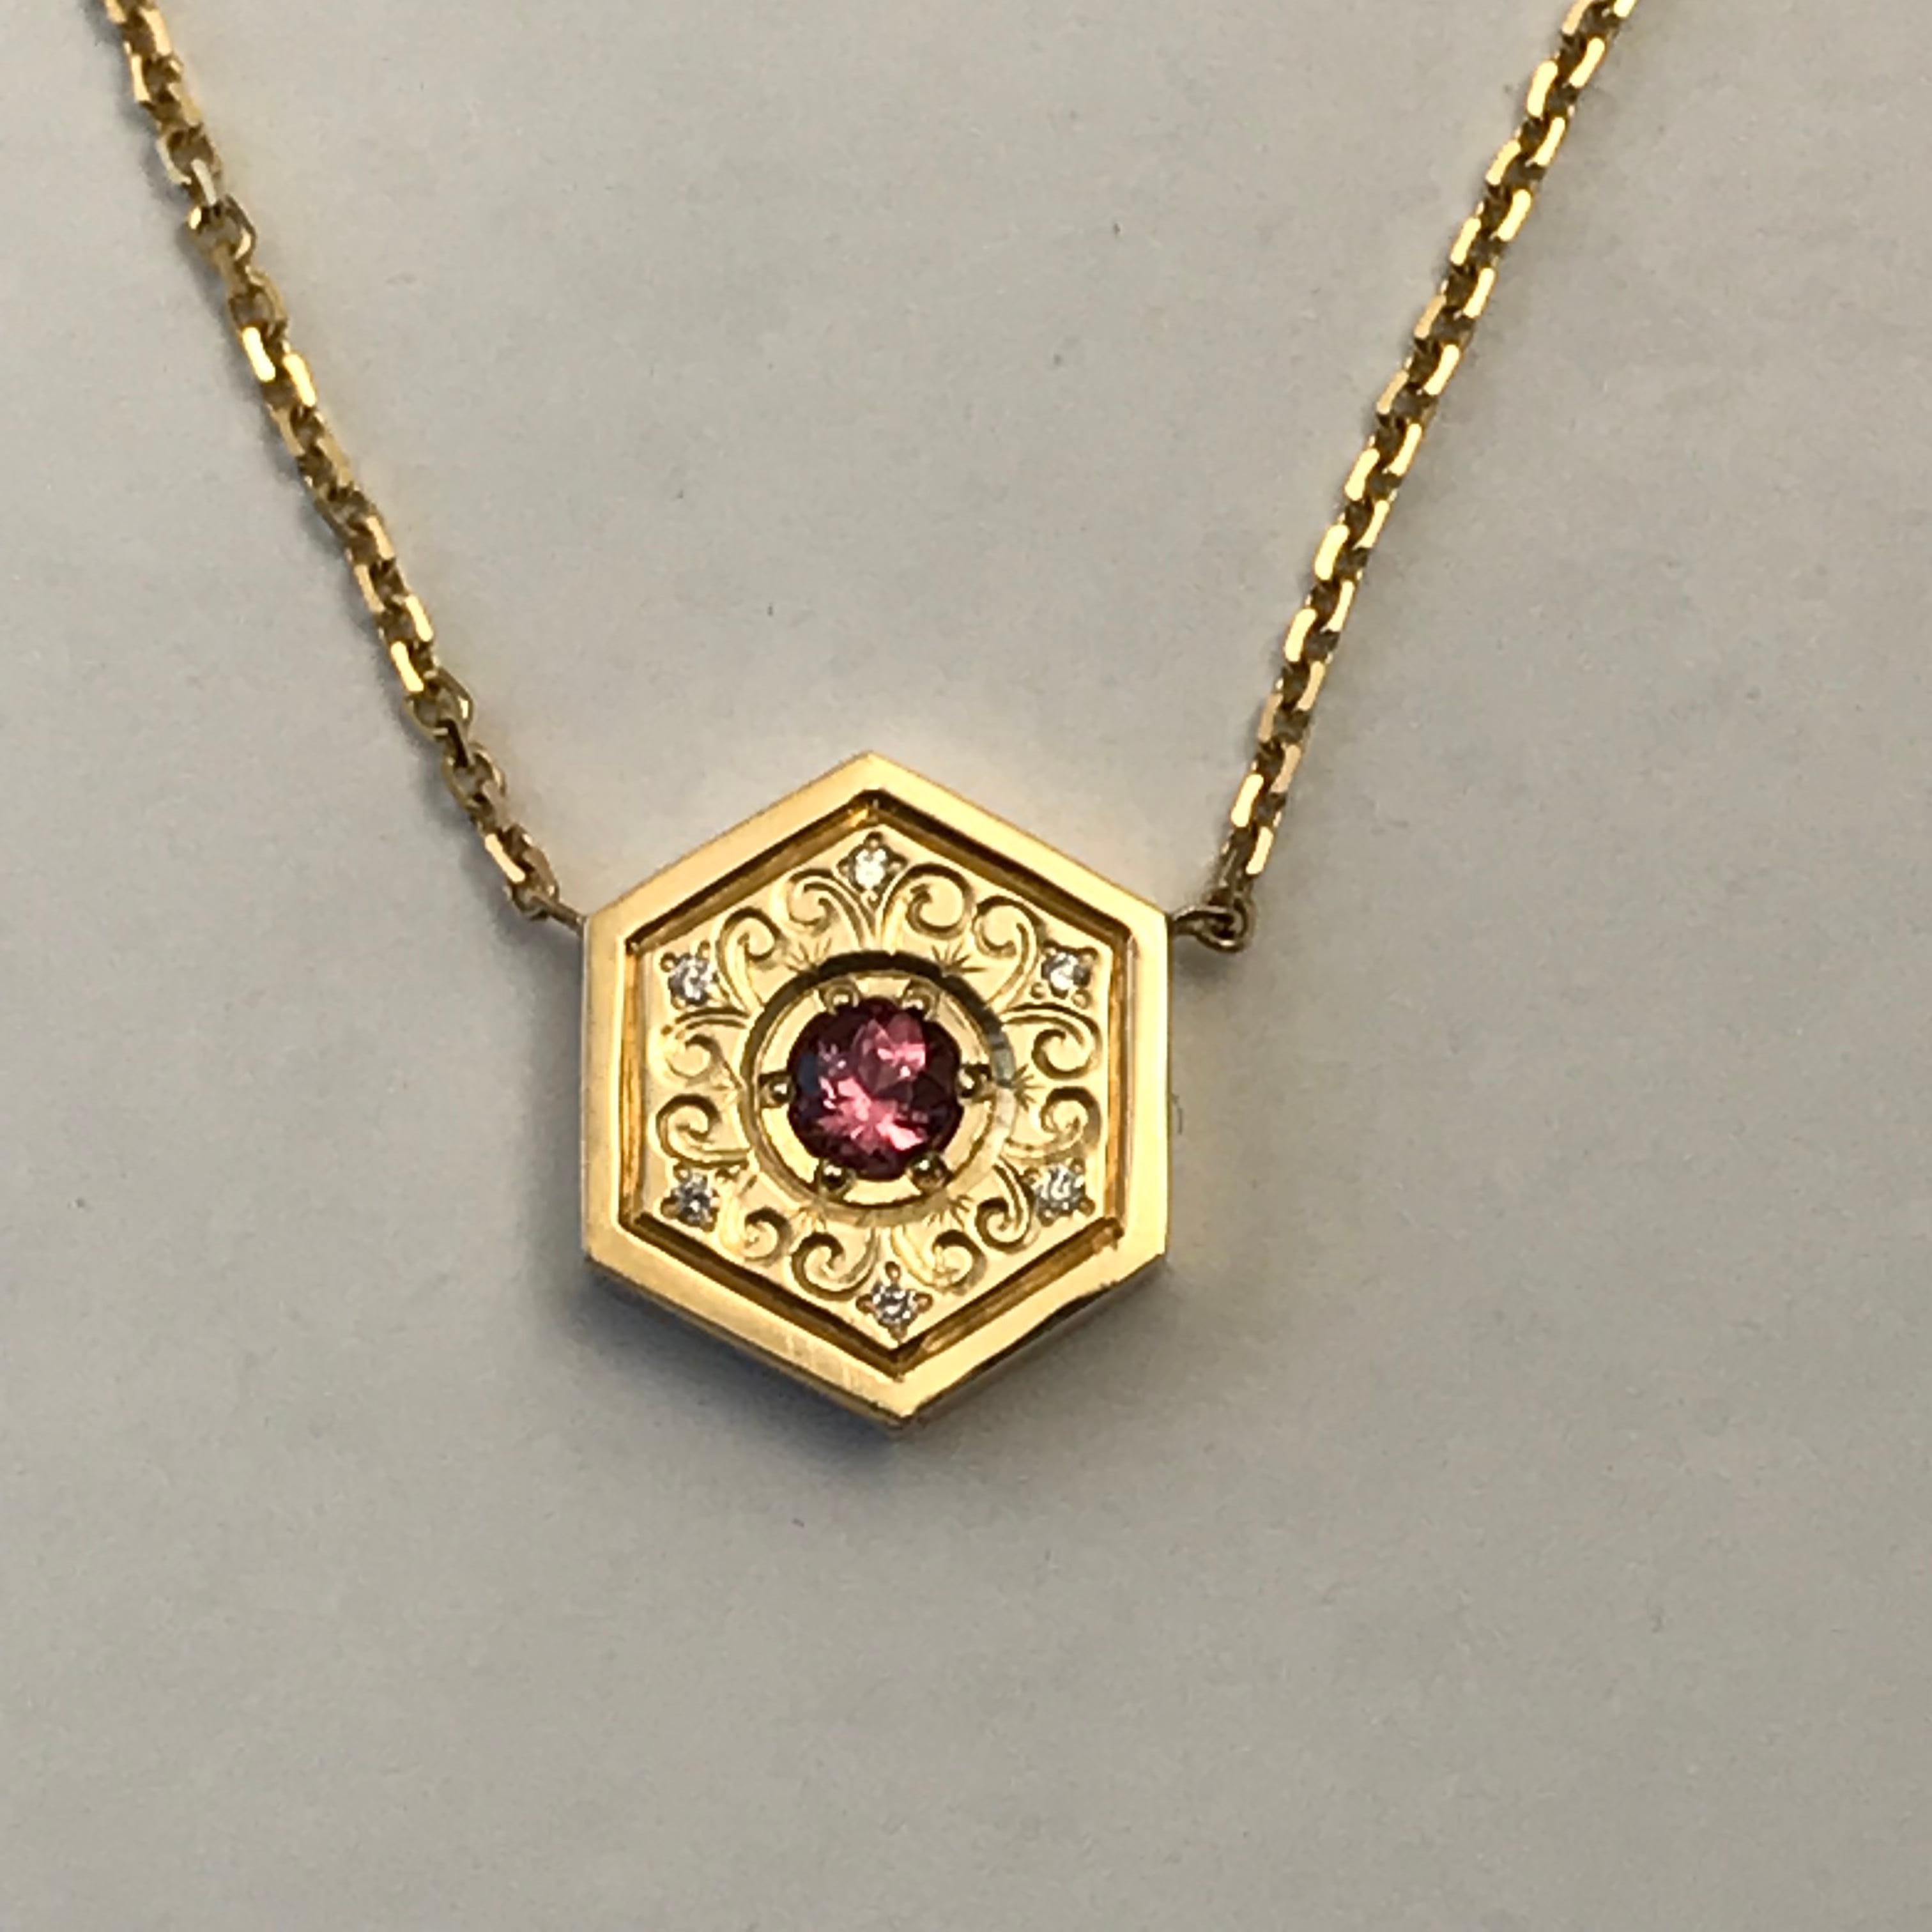 Hexagon Necklace in 14K Gold & Gems-Pink Sapphire Flower

This is a one of a series of unique necklaces. Each one is hand engraved in different styles and different gemstones. 

This beautiful pendant is in the very trendy hexagon style and is set